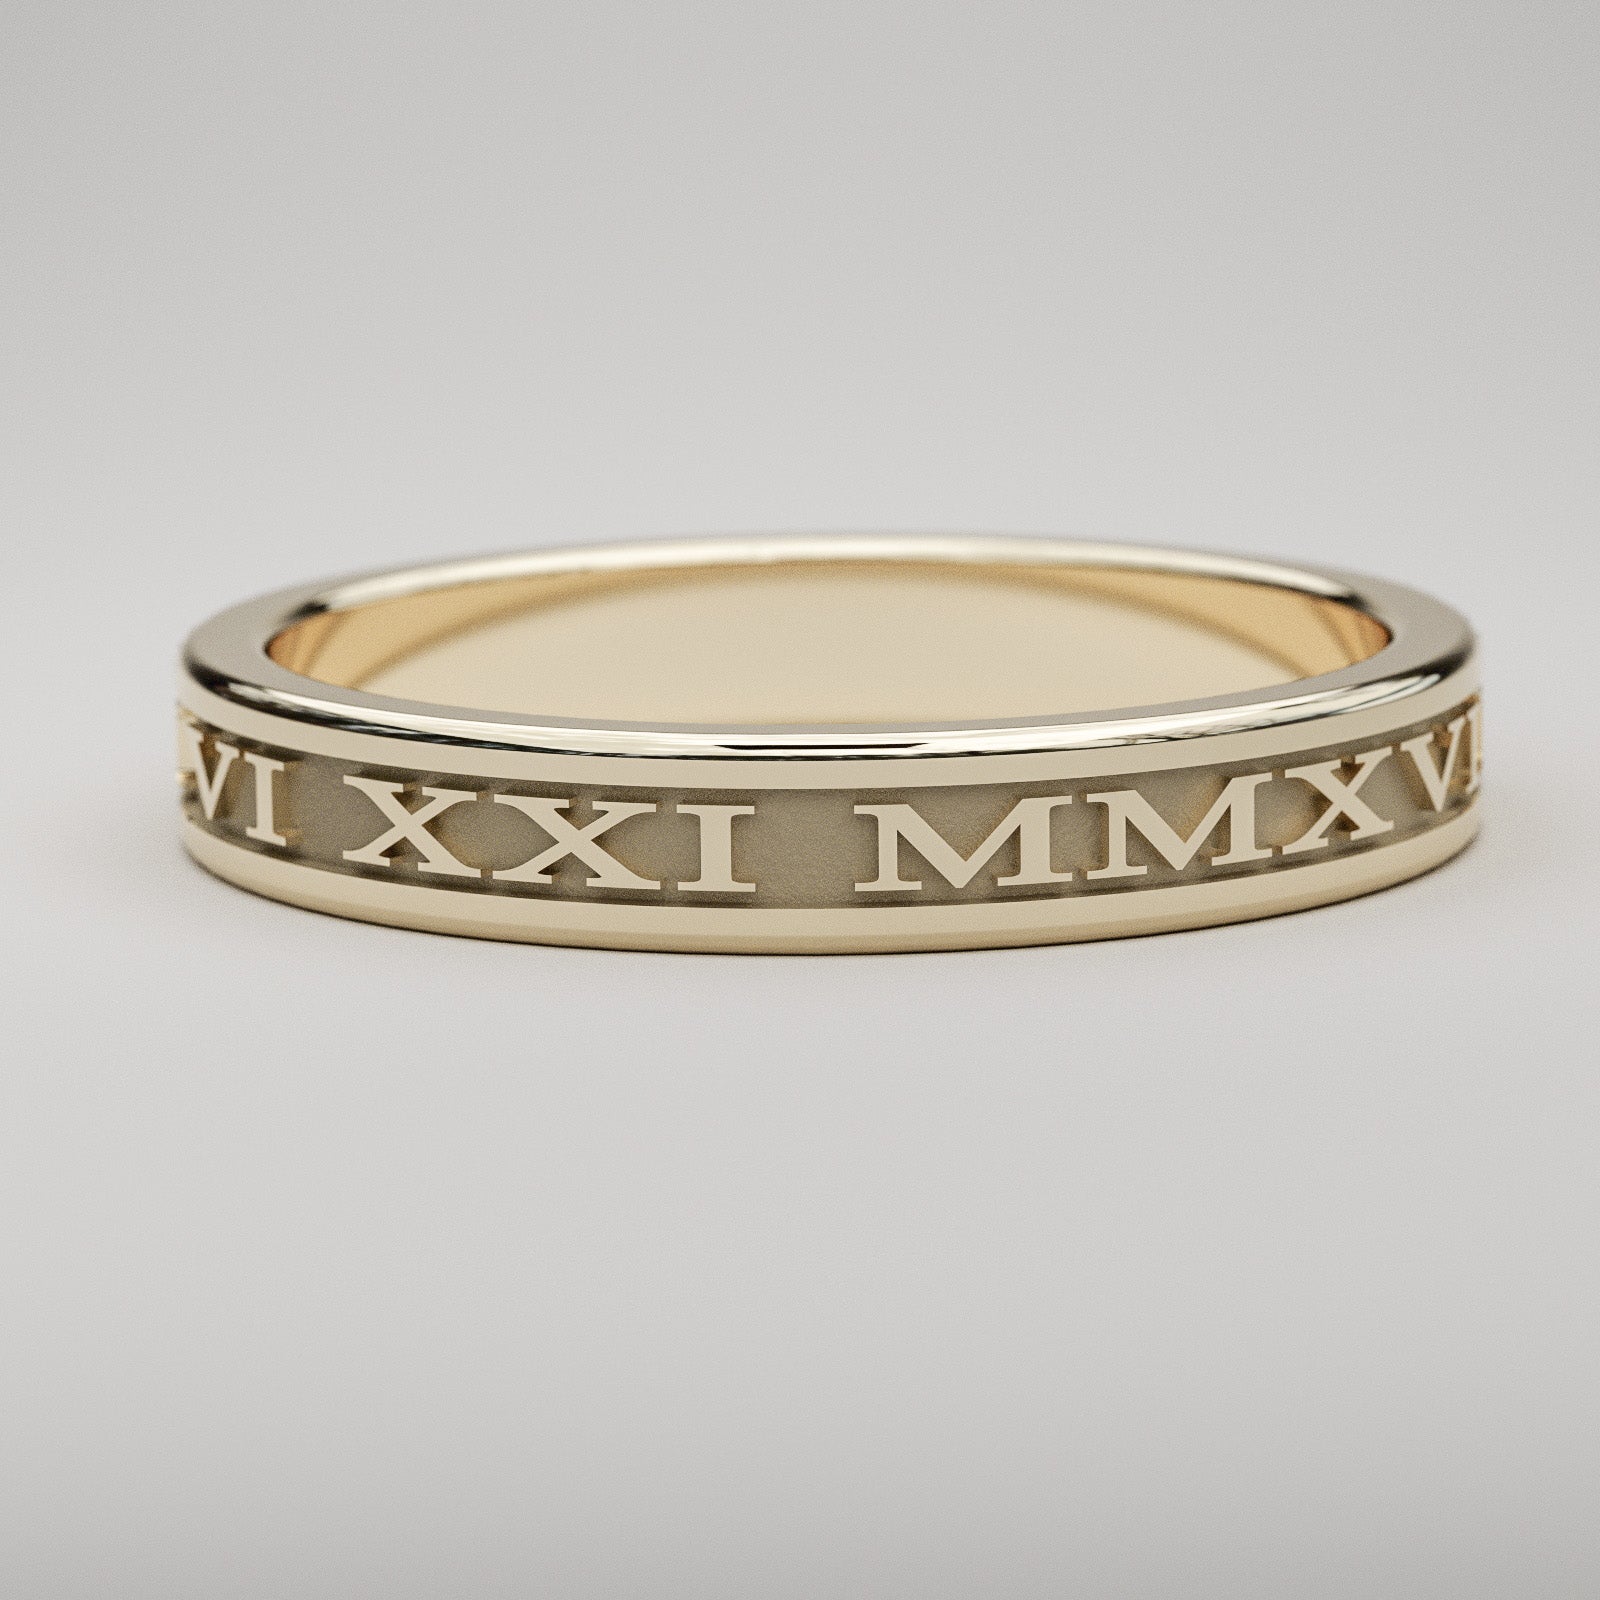 Custom Roman Numeral wedding band in 14k white gold, 3mm wide